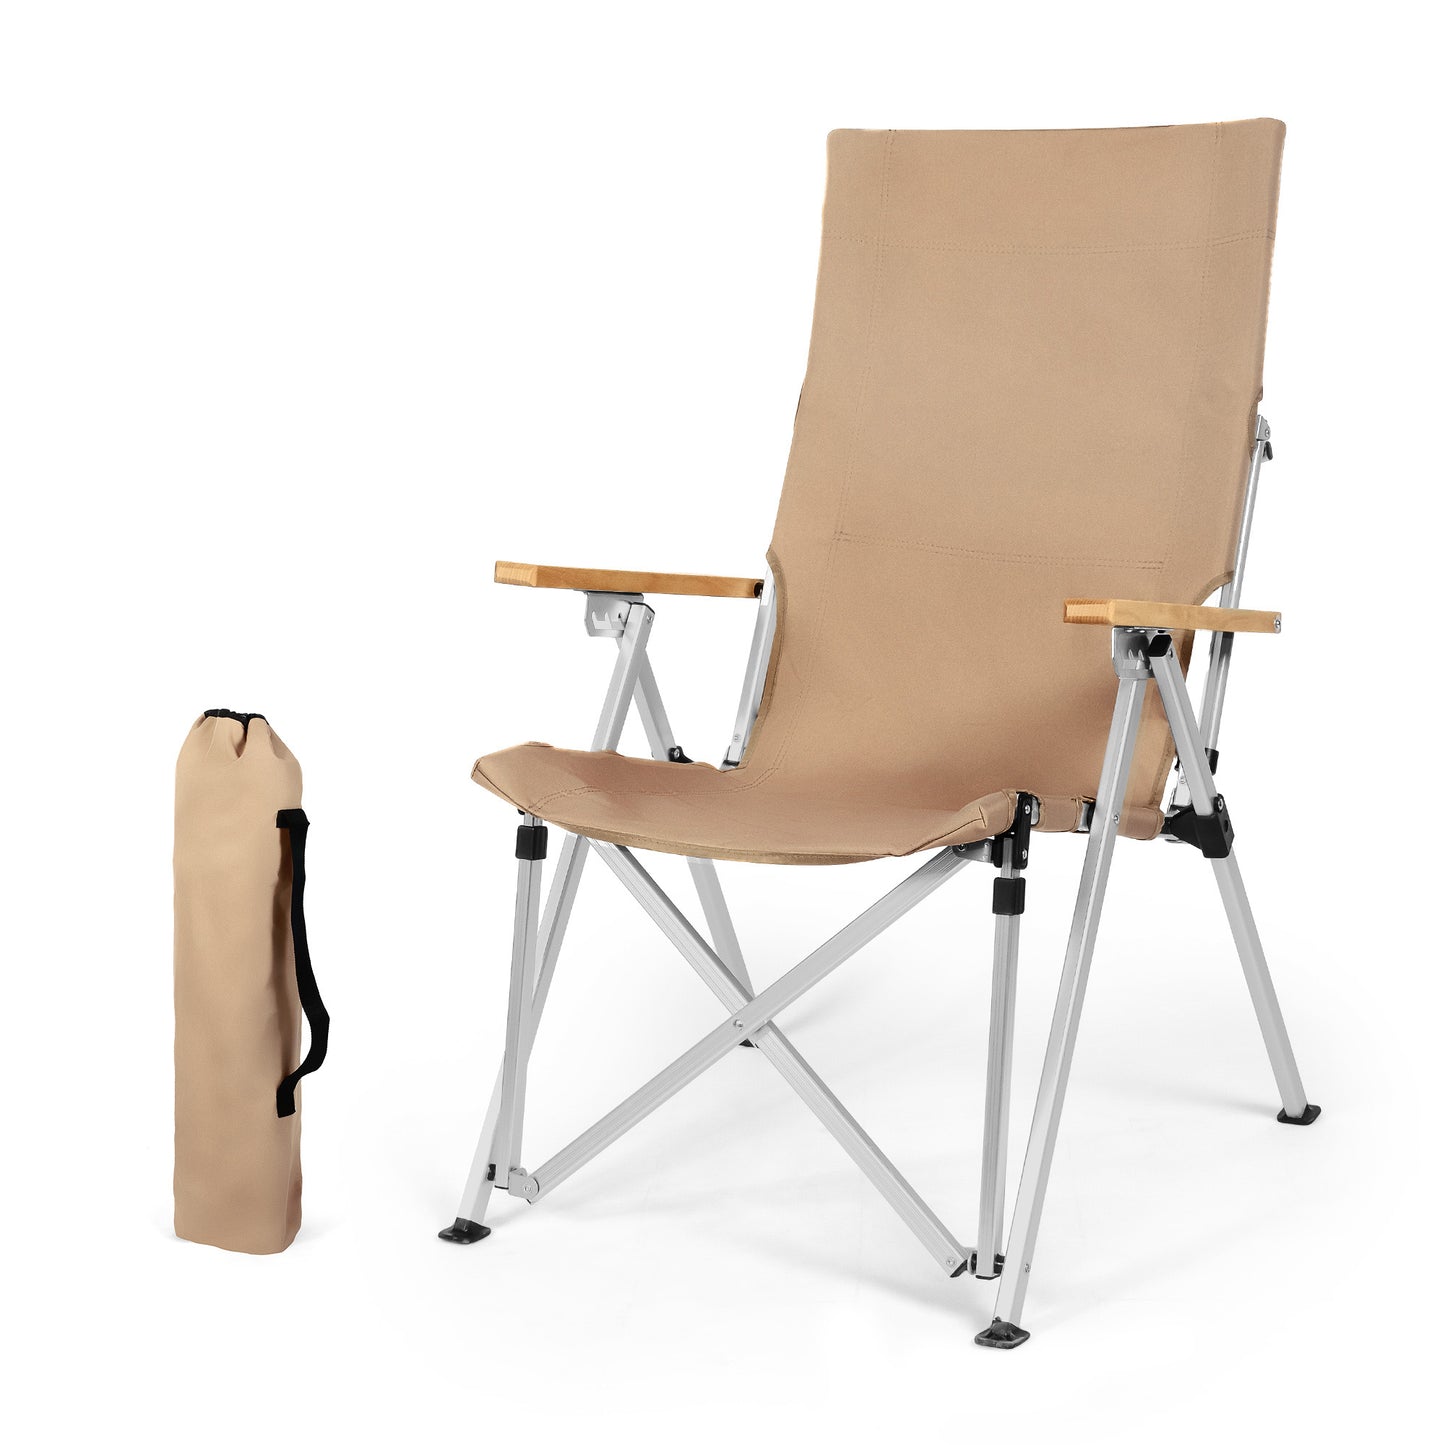 Portable Folding Camping Chair with 3 Positions Adjustable Wooden Armrest Aluminum Frame, Beige